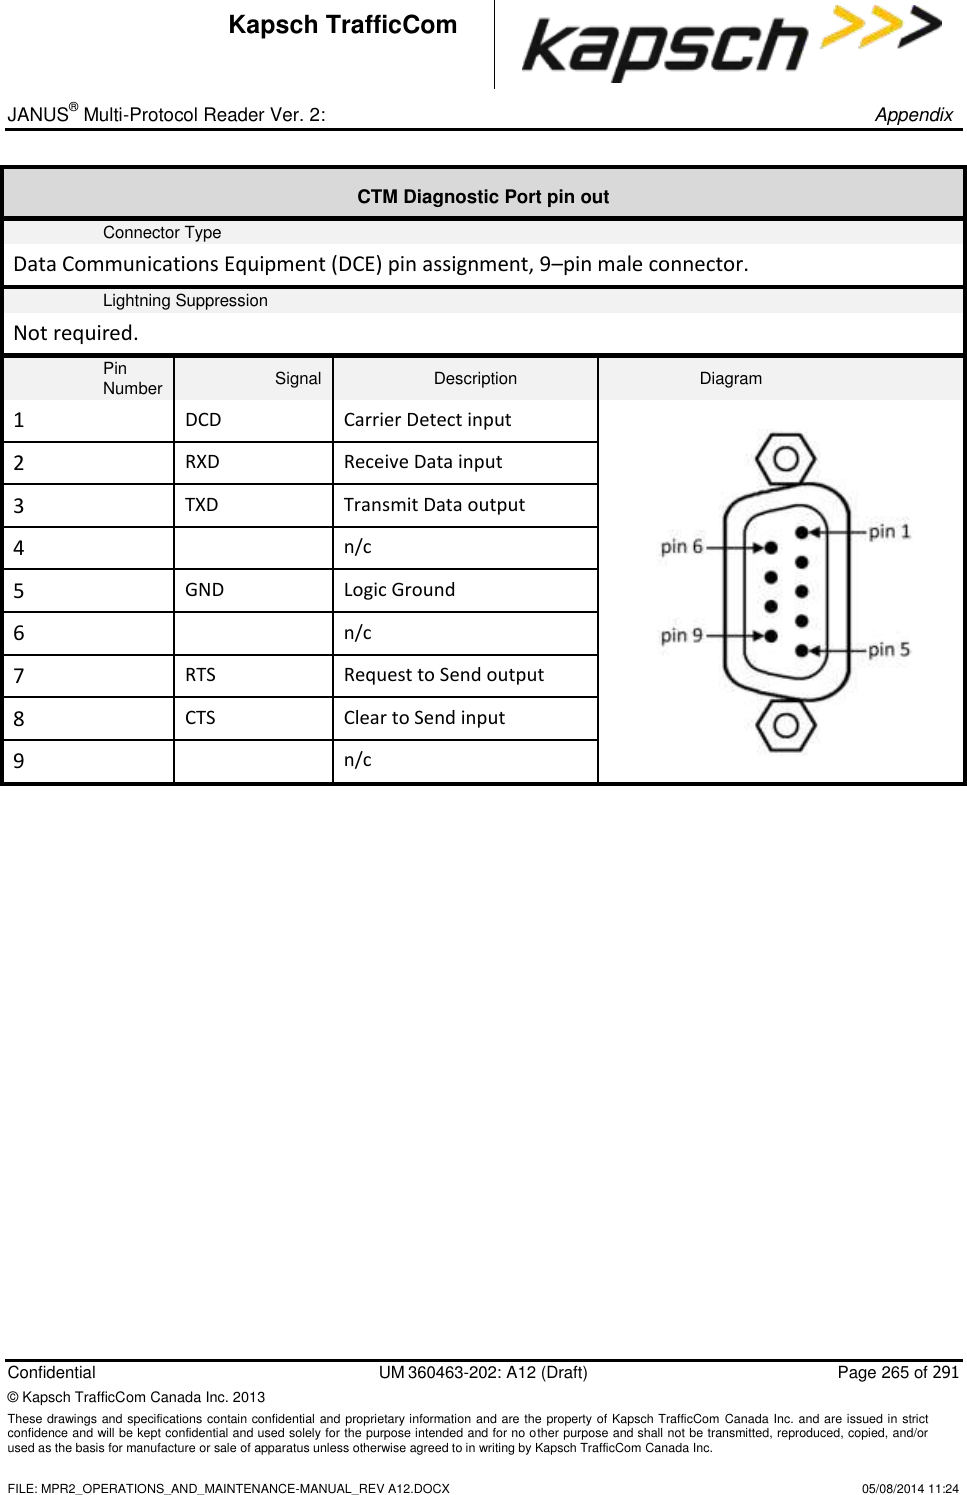 _ JANUS® Multi-Protocol Reader Ver. 2:       Appendix   Confidential  UM 360463-202: A12 (Draft)  Page 265 of 291 © Kapsch TrafficCom Canada Inc. 2013 These drawings and specifications contain confidential and proprietary information and are the property of Kapsch TrafficCom  Canada Inc. and are issued in strict confidence and will be kept confidential and used solely for the purpose intended and for no other purpose and shall not be transmitted, reproduced, copied, and/or used as the basis for manufacture or sale of apparatus unless otherwise agreed to in writing by Kapsch TrafficCom Canada Inc.    FILE: MPR2_OPERATIONS_AND_MAINTENANCE-MANUAL_REV A12.DOCX    05/08/2014 11:24 Kapsch TrafficCom CTM Diagnostic Port pin out Connector Type Data Communications Equipment (DCE) pin assignment, 9–pin male connector. Lightning Suppression Not required. Pin Number Signal Description Diagram 1 DCD Carrier Detect input  2 RXD Receive Data input 3 TXD Transmit Data output 4  n/c 5 GND Logic Ground 6  n/c 7 RTS Request to Send output 8 CTS Clear to Send input 9  n/c    